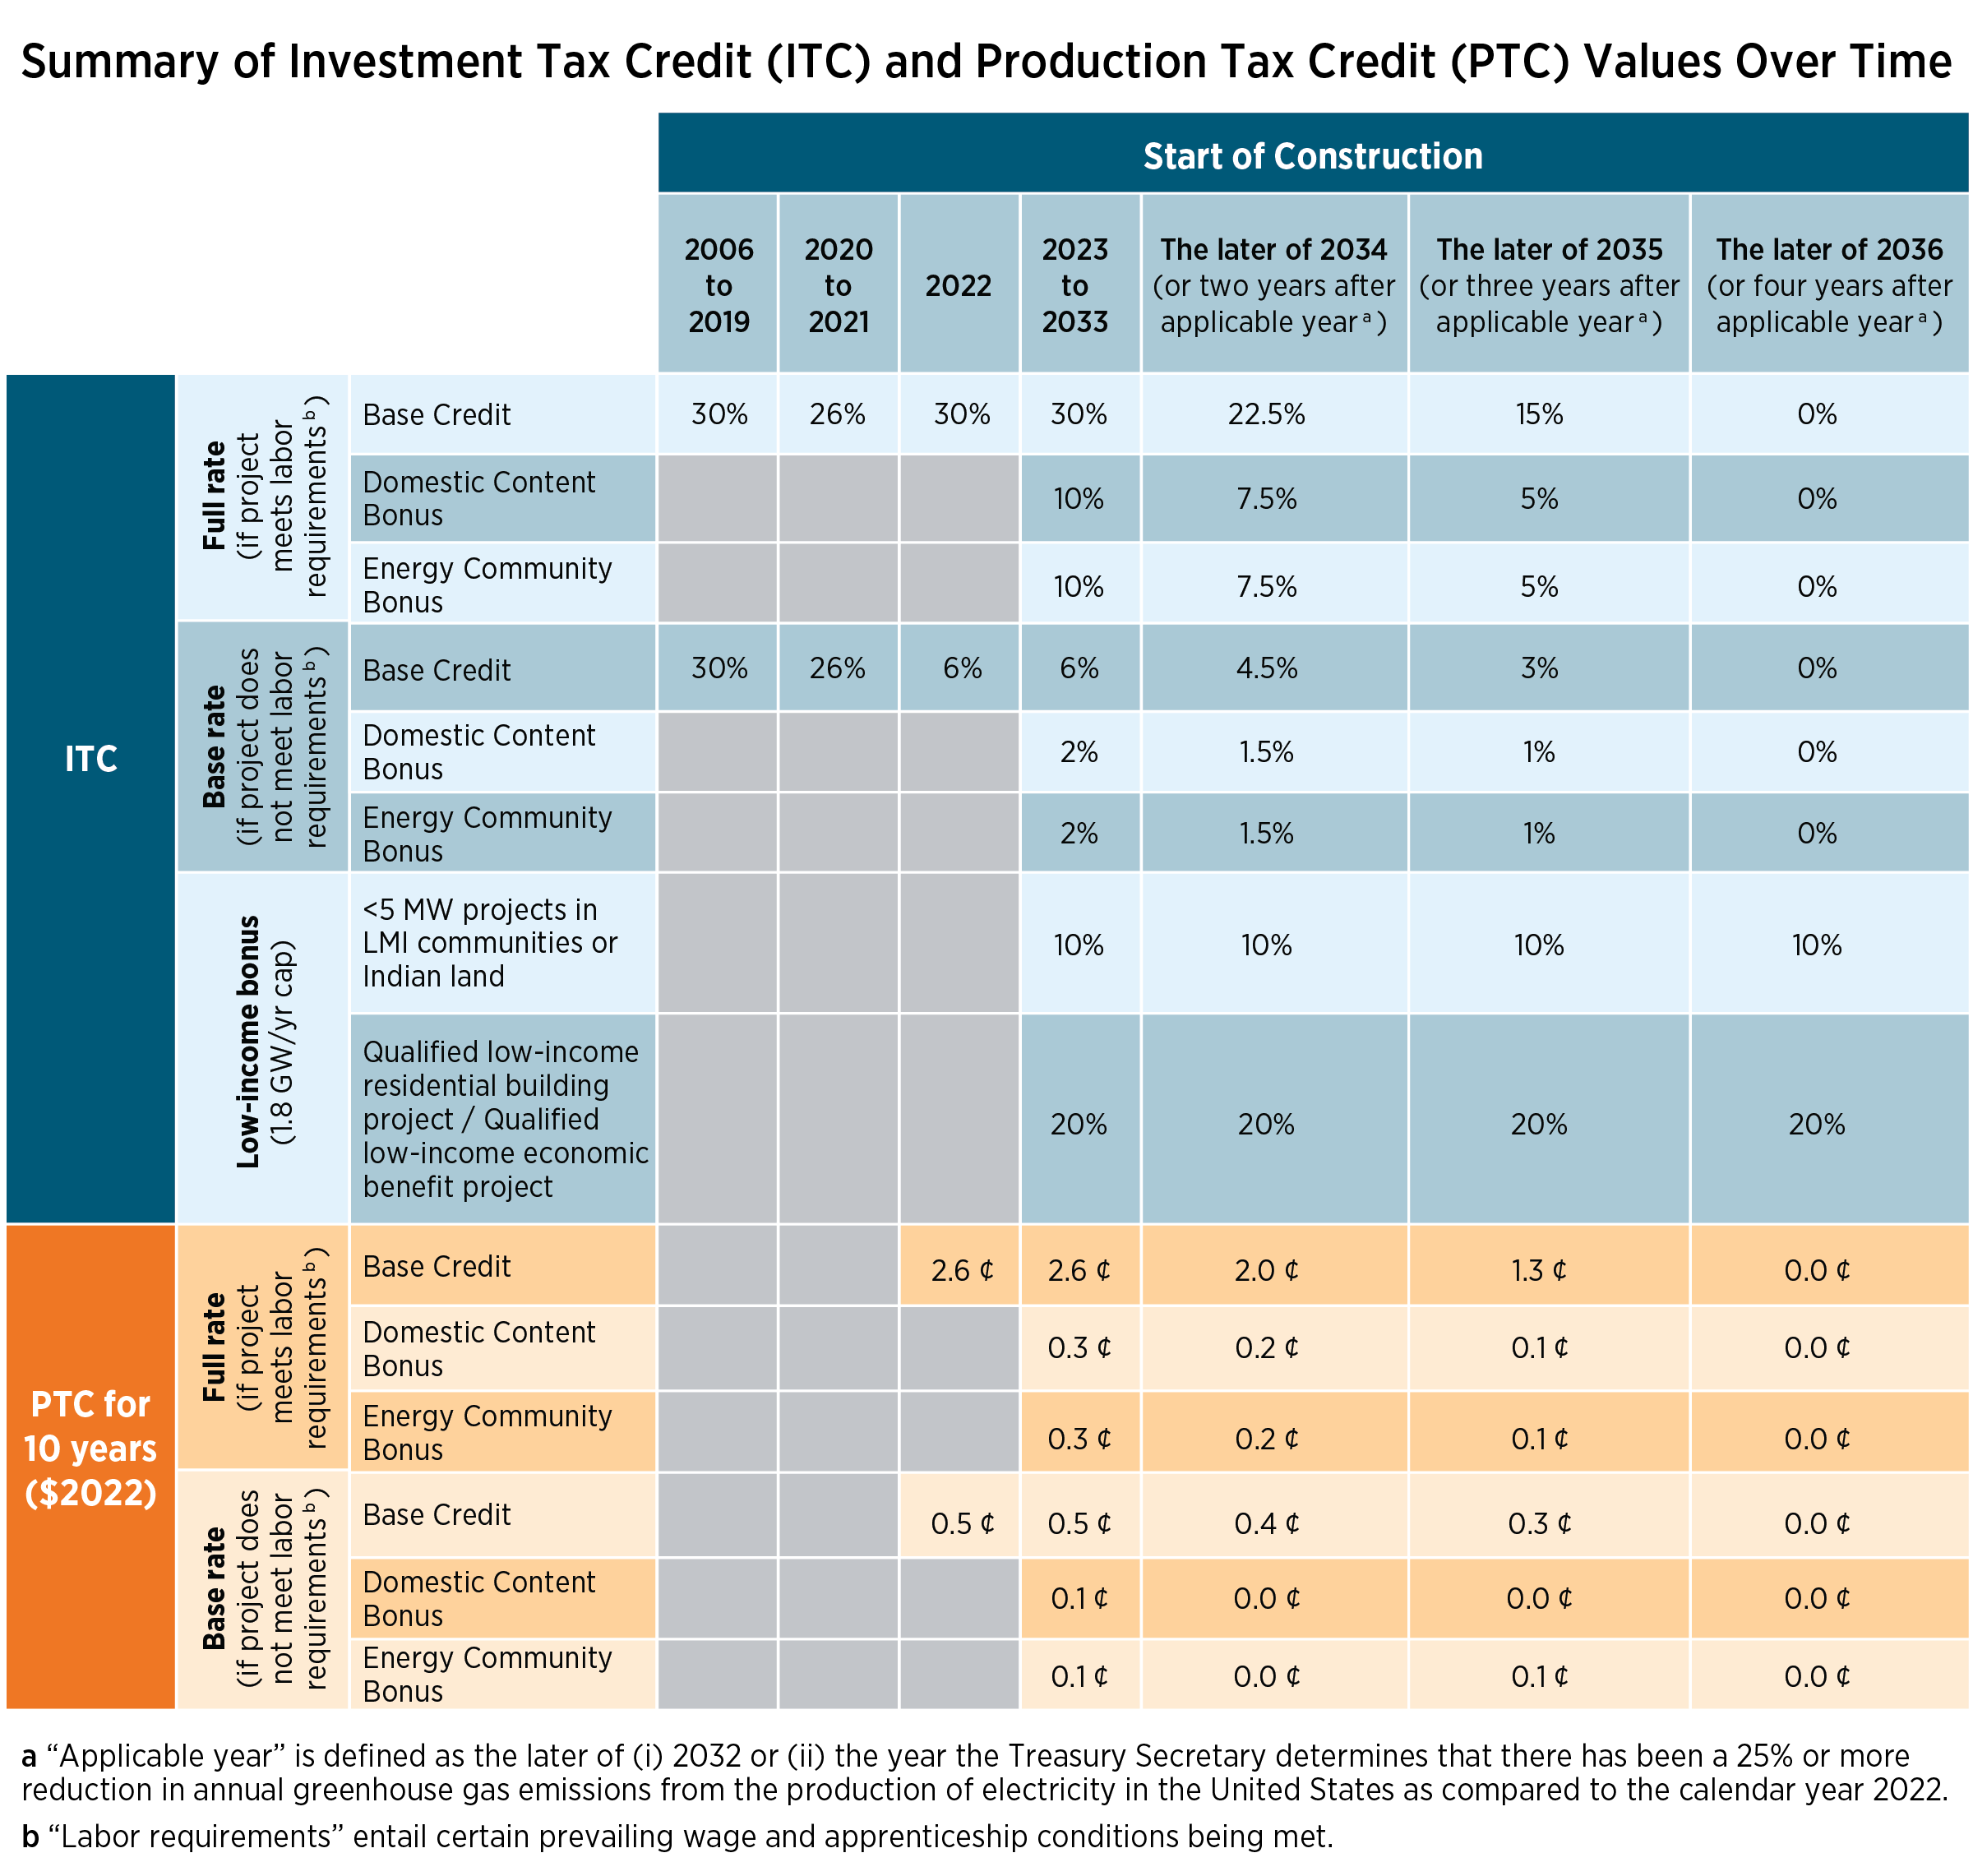 Table showing summary of Investment Tax Credit (ITC) and Production Tax Credit (PTC) Values Over Time